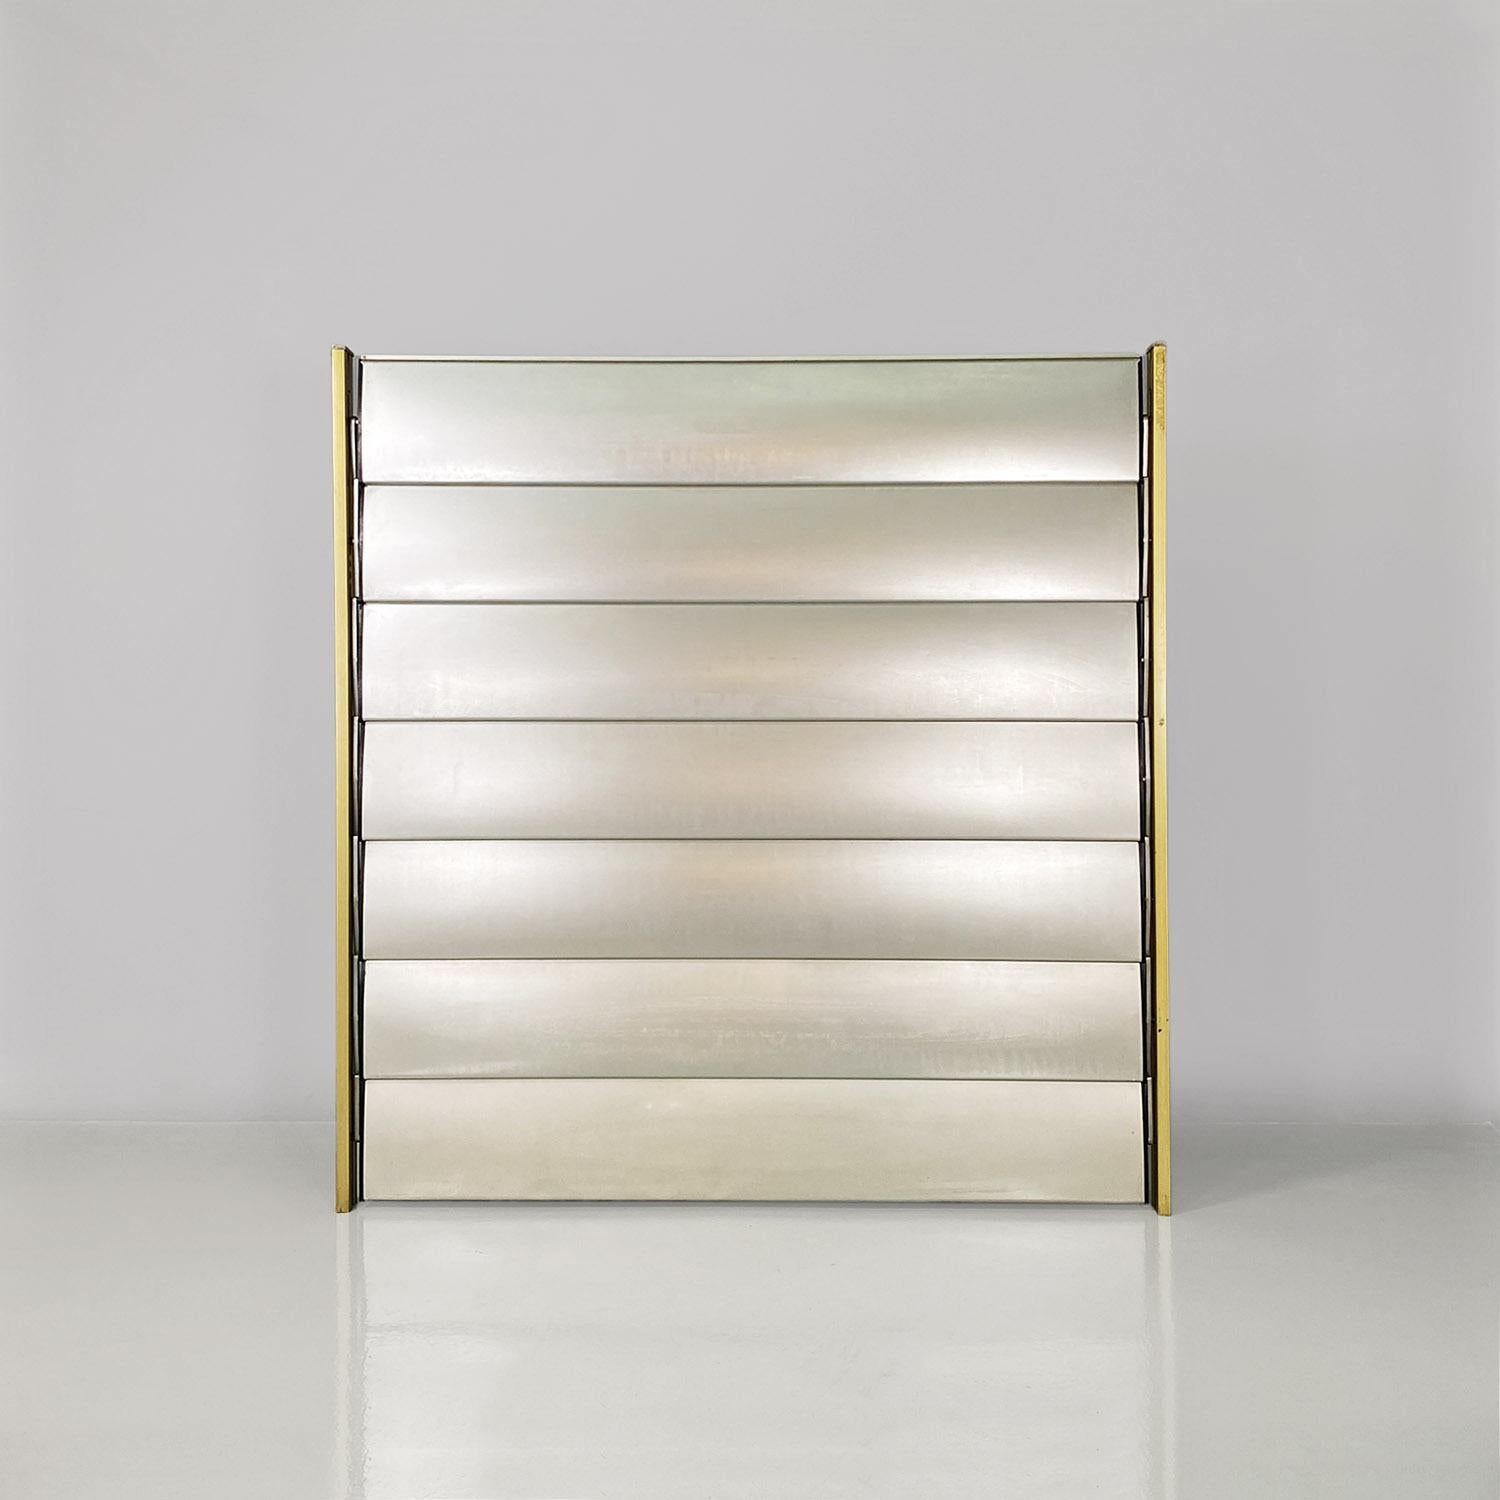  French industrial brise-soleil aluminium panel by Jean Prouvè, 1956.
Aluminum panel or brise-soleil, from the facade of the school in Beziers, France.
The structure is composed of an aluminum frame with a golden finish which supports seven sunshade